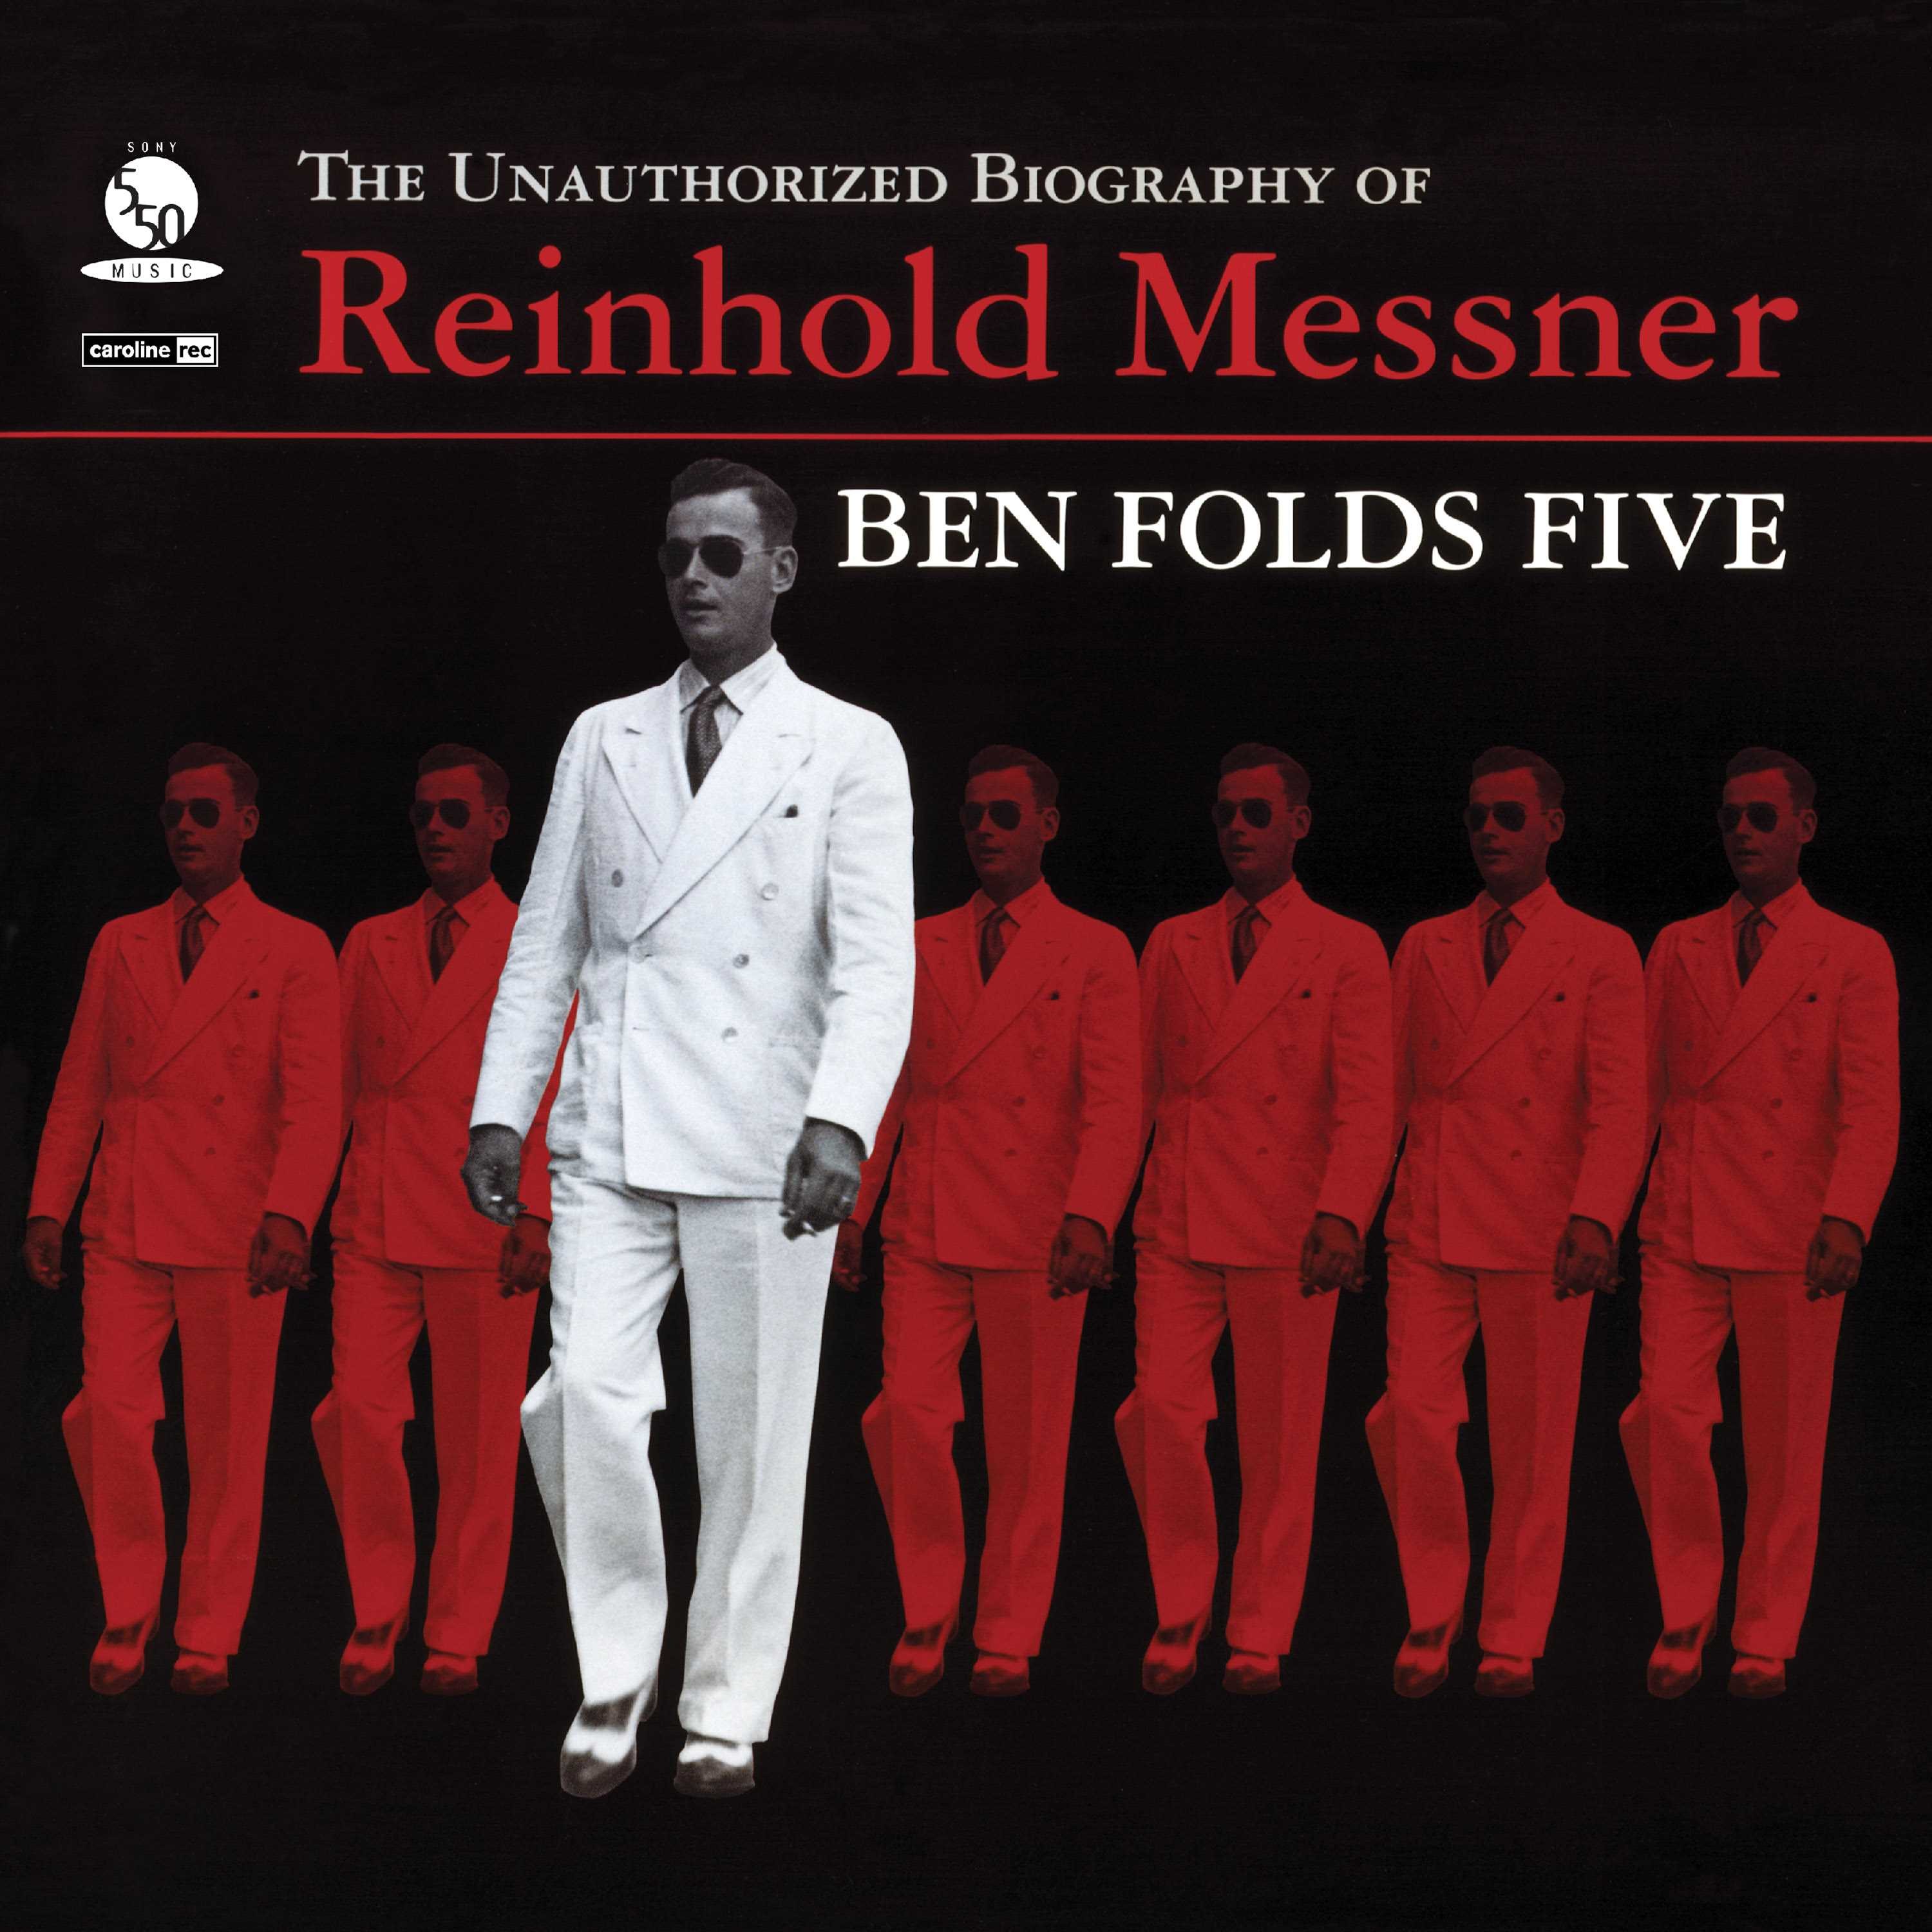 Ben Folds Five - The Unauthorized Biography of Reinhold Messner LP